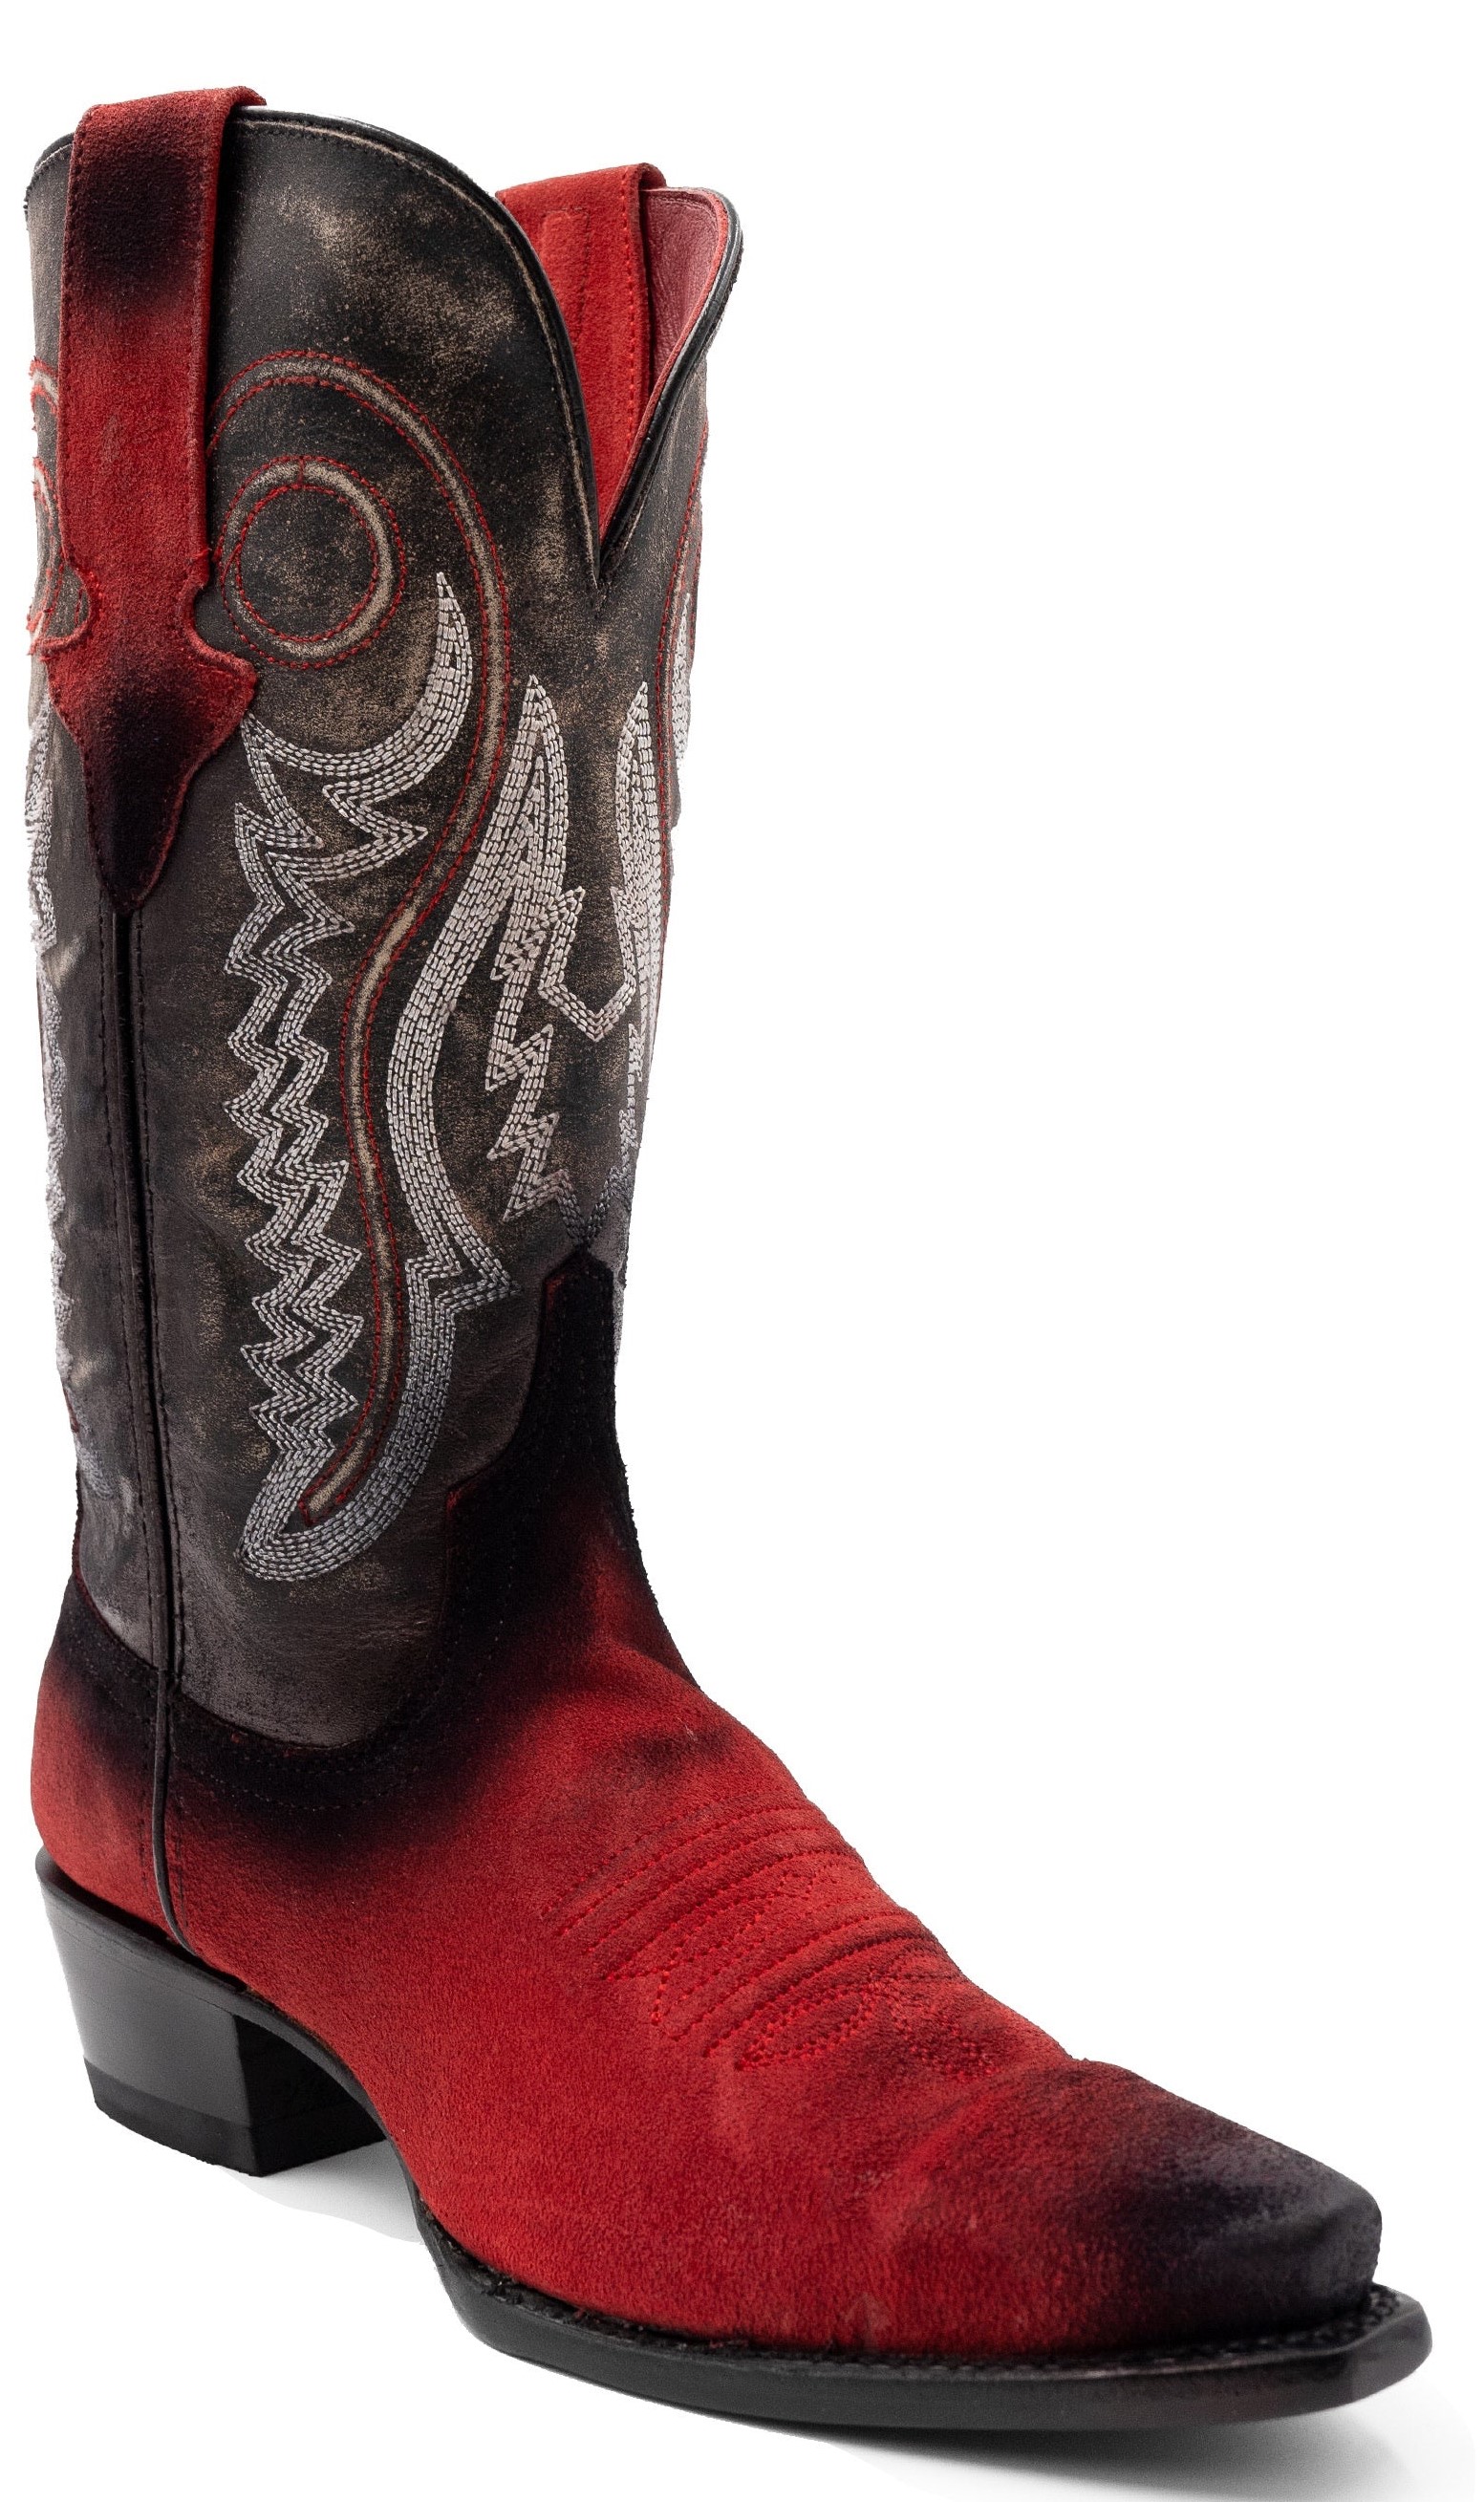 Ferrini Ladies "Roughrider" Red Full Grain Leather Snipped Toe Cowgirl Shoes 84361-22